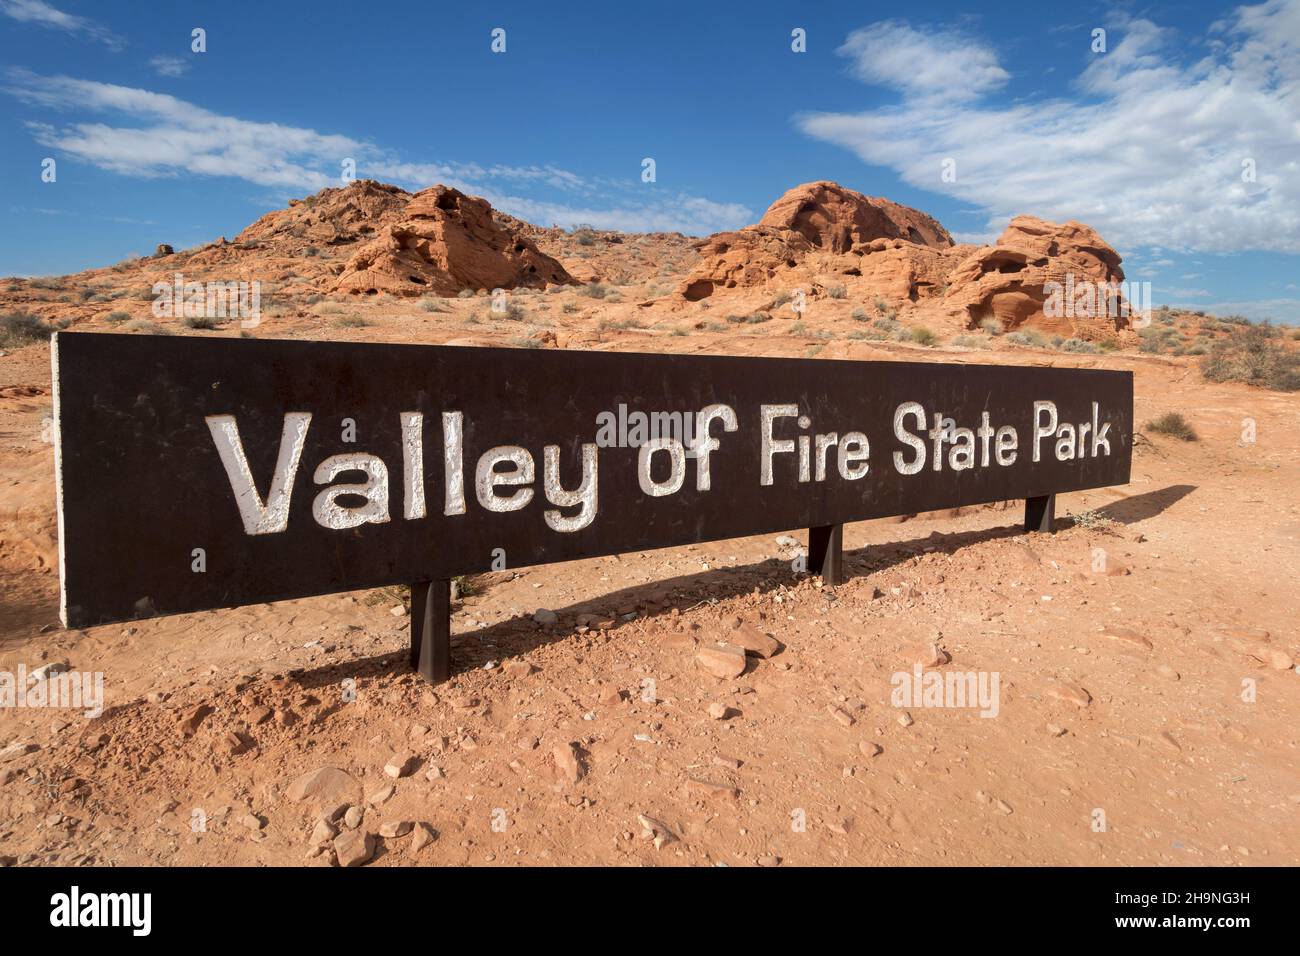 Valley of Fire State Park Entrance in Nevada, USA with White Text Letters Table Sign and Scenic Desert Rock Landscape in Background Stock Photo